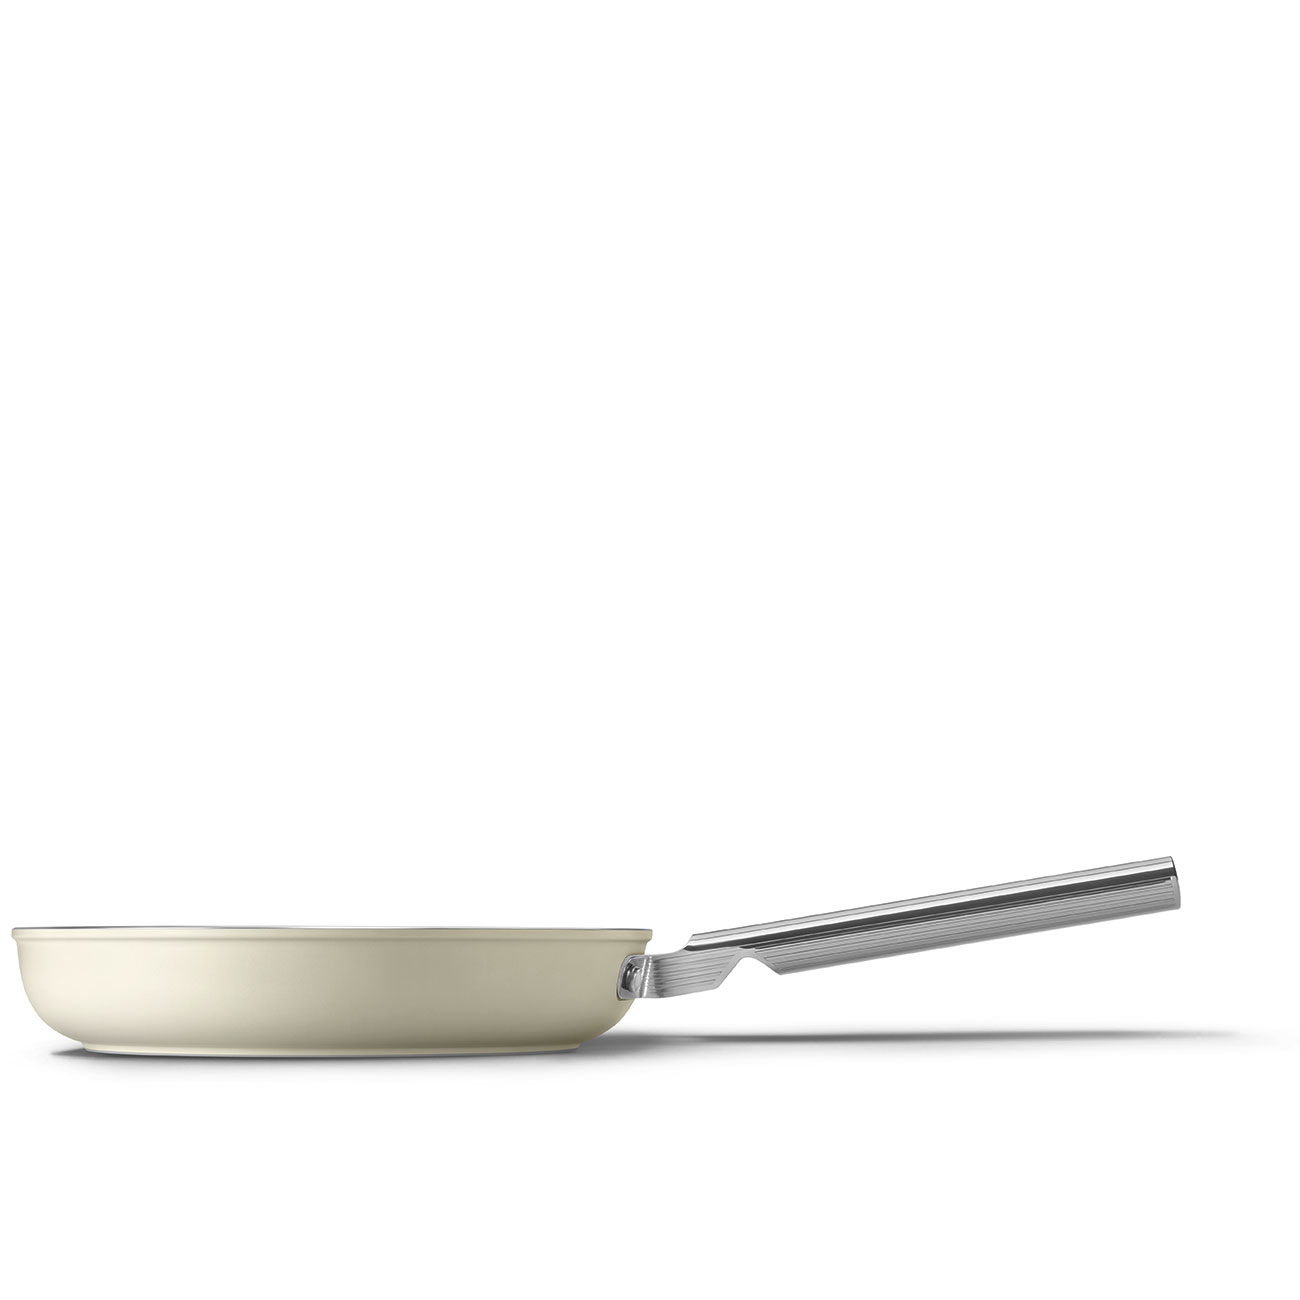 Smeg Cookware 50's Style Frying Pan